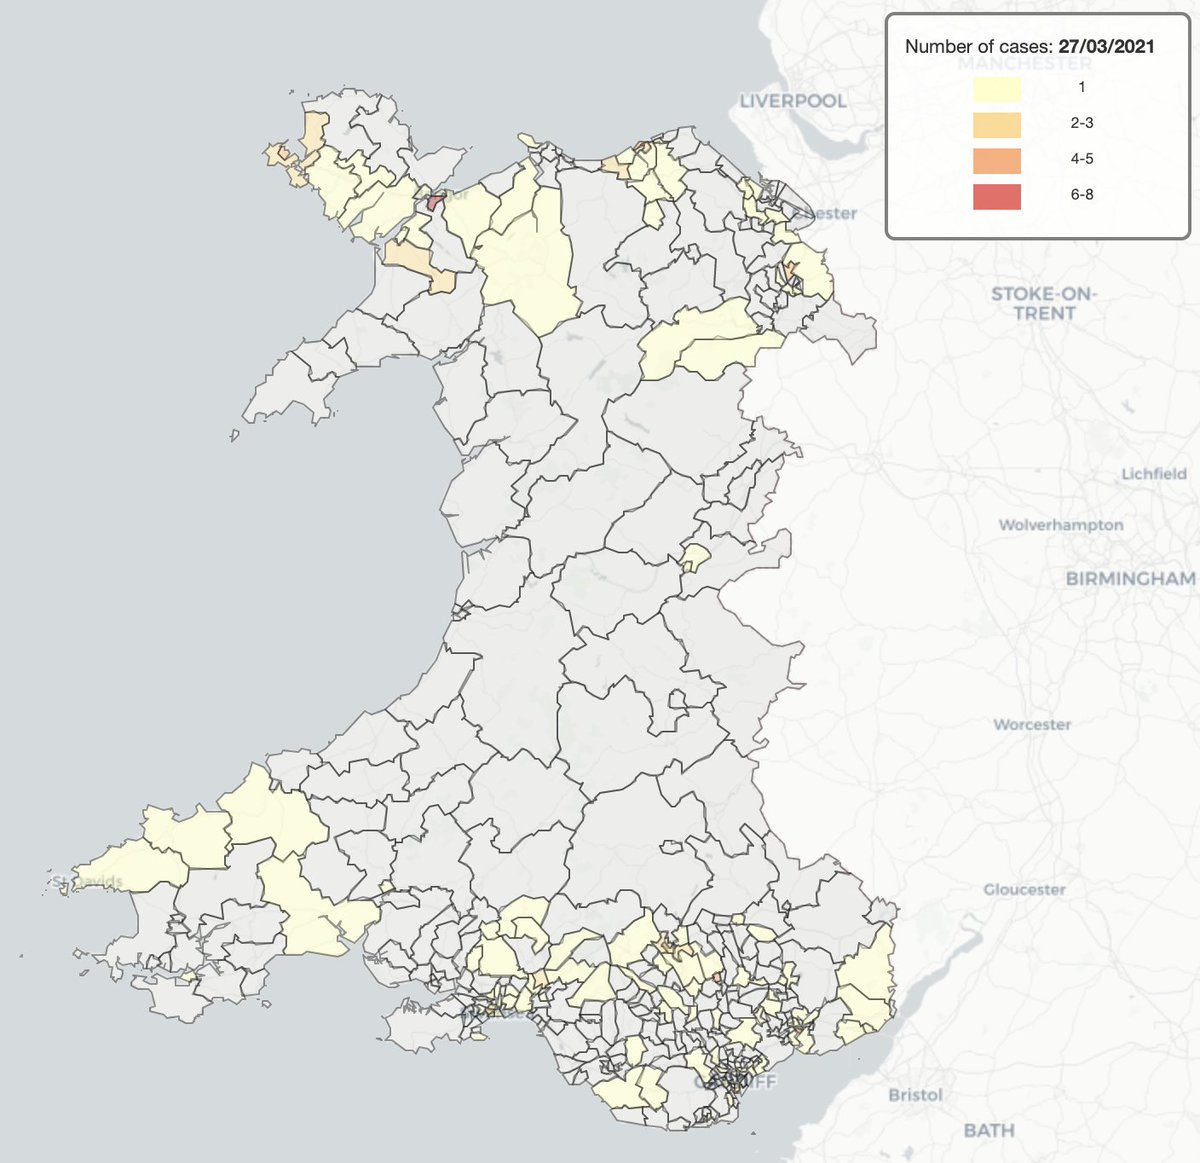 The map for today's number of #COVID19 cases in specific areas of Wales is now online! 🏴󠁧󠁢󠁷󠁬󠁳󠁿🦠🗺️

bit.ly/3ptuytZ

Some stats from the data today:

Bangor South, Gwynedd reports 8 cases - up by 7 ⬆️

Bodedern & Rhosneigr, Anglesey reports 2 cases - down by 9 ⬇️